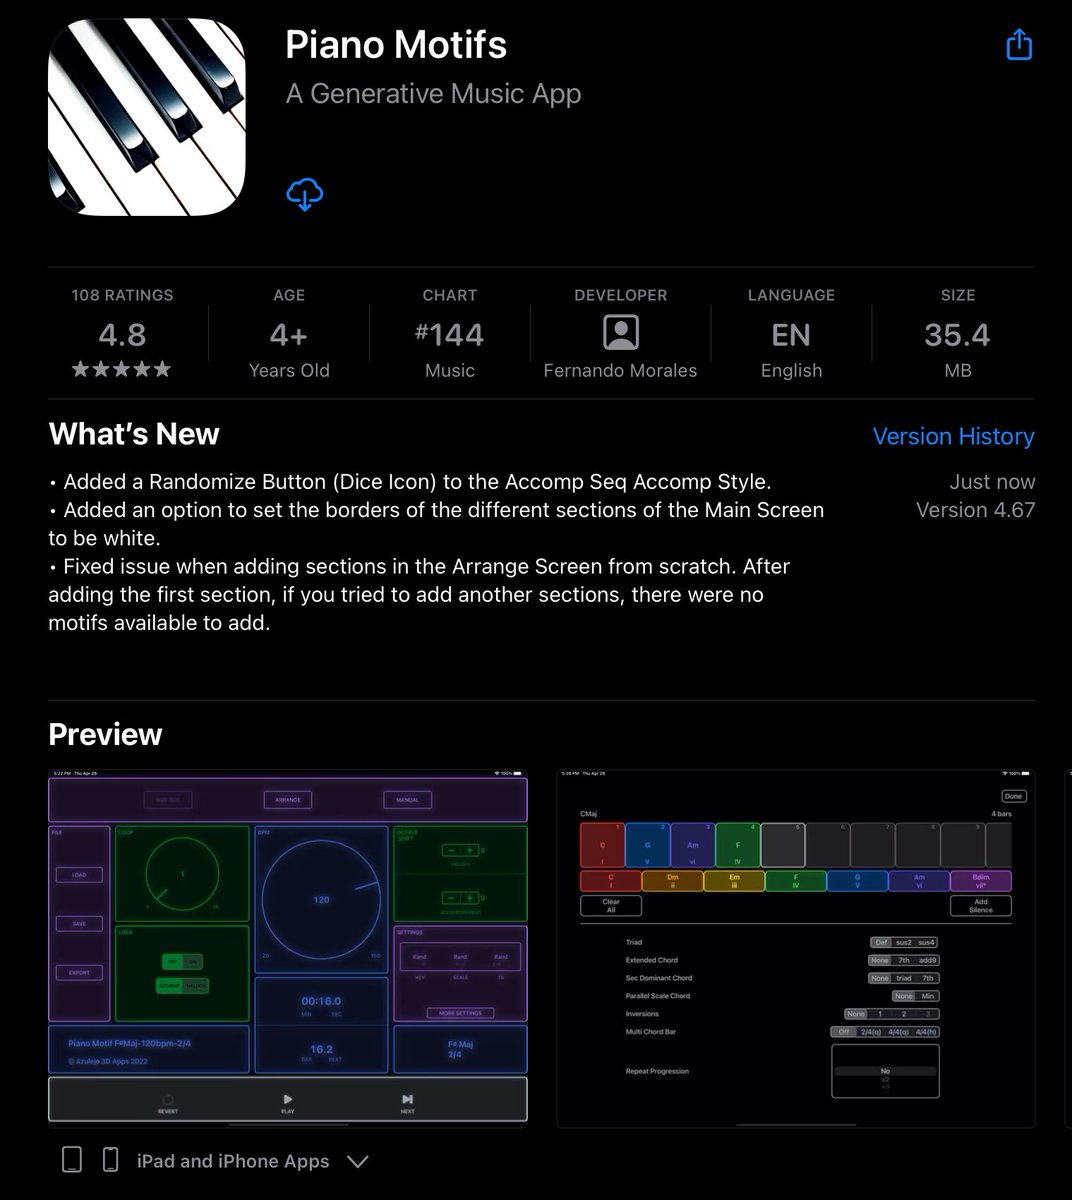 A new version of Piano Motifs (v4.67) is available. A randomize option was added to the Arpeggio Seq Accomp Style. Try it out!
#generativemusic #ipadmusic #musicapp #midi #midiloops #iosmusicproduction #musicproducer #iosapps #iphonemusic #pianomotifs #piano #pianomusic